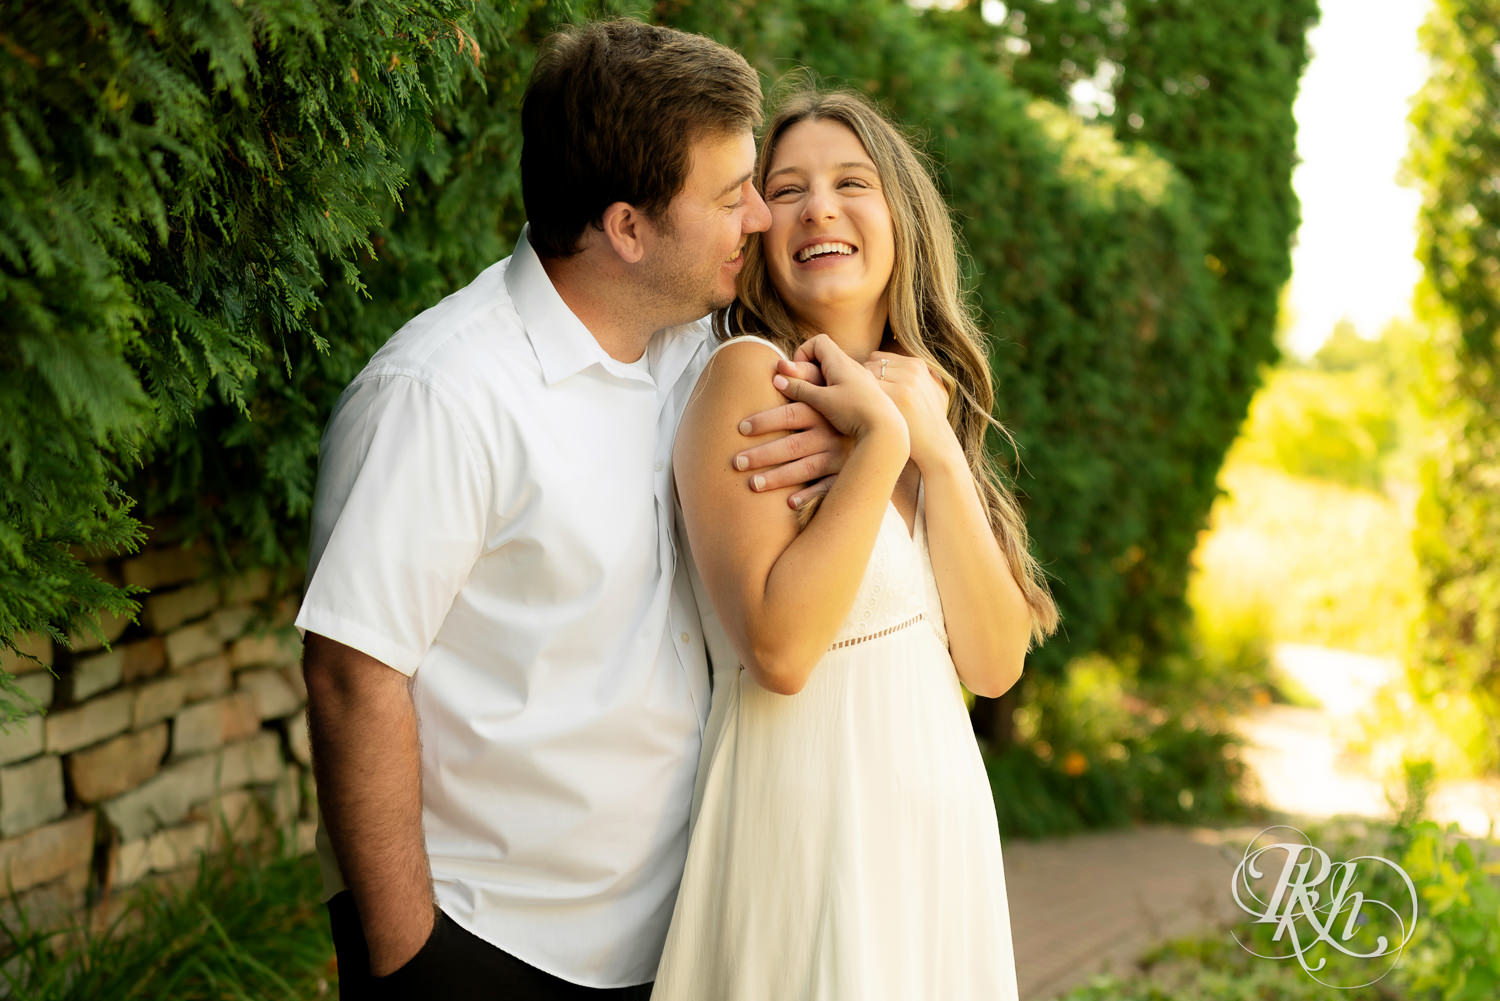 Man and woman in white dress laugh during engagement photography at Centennial Lakes Park in Edina, Minnesota.